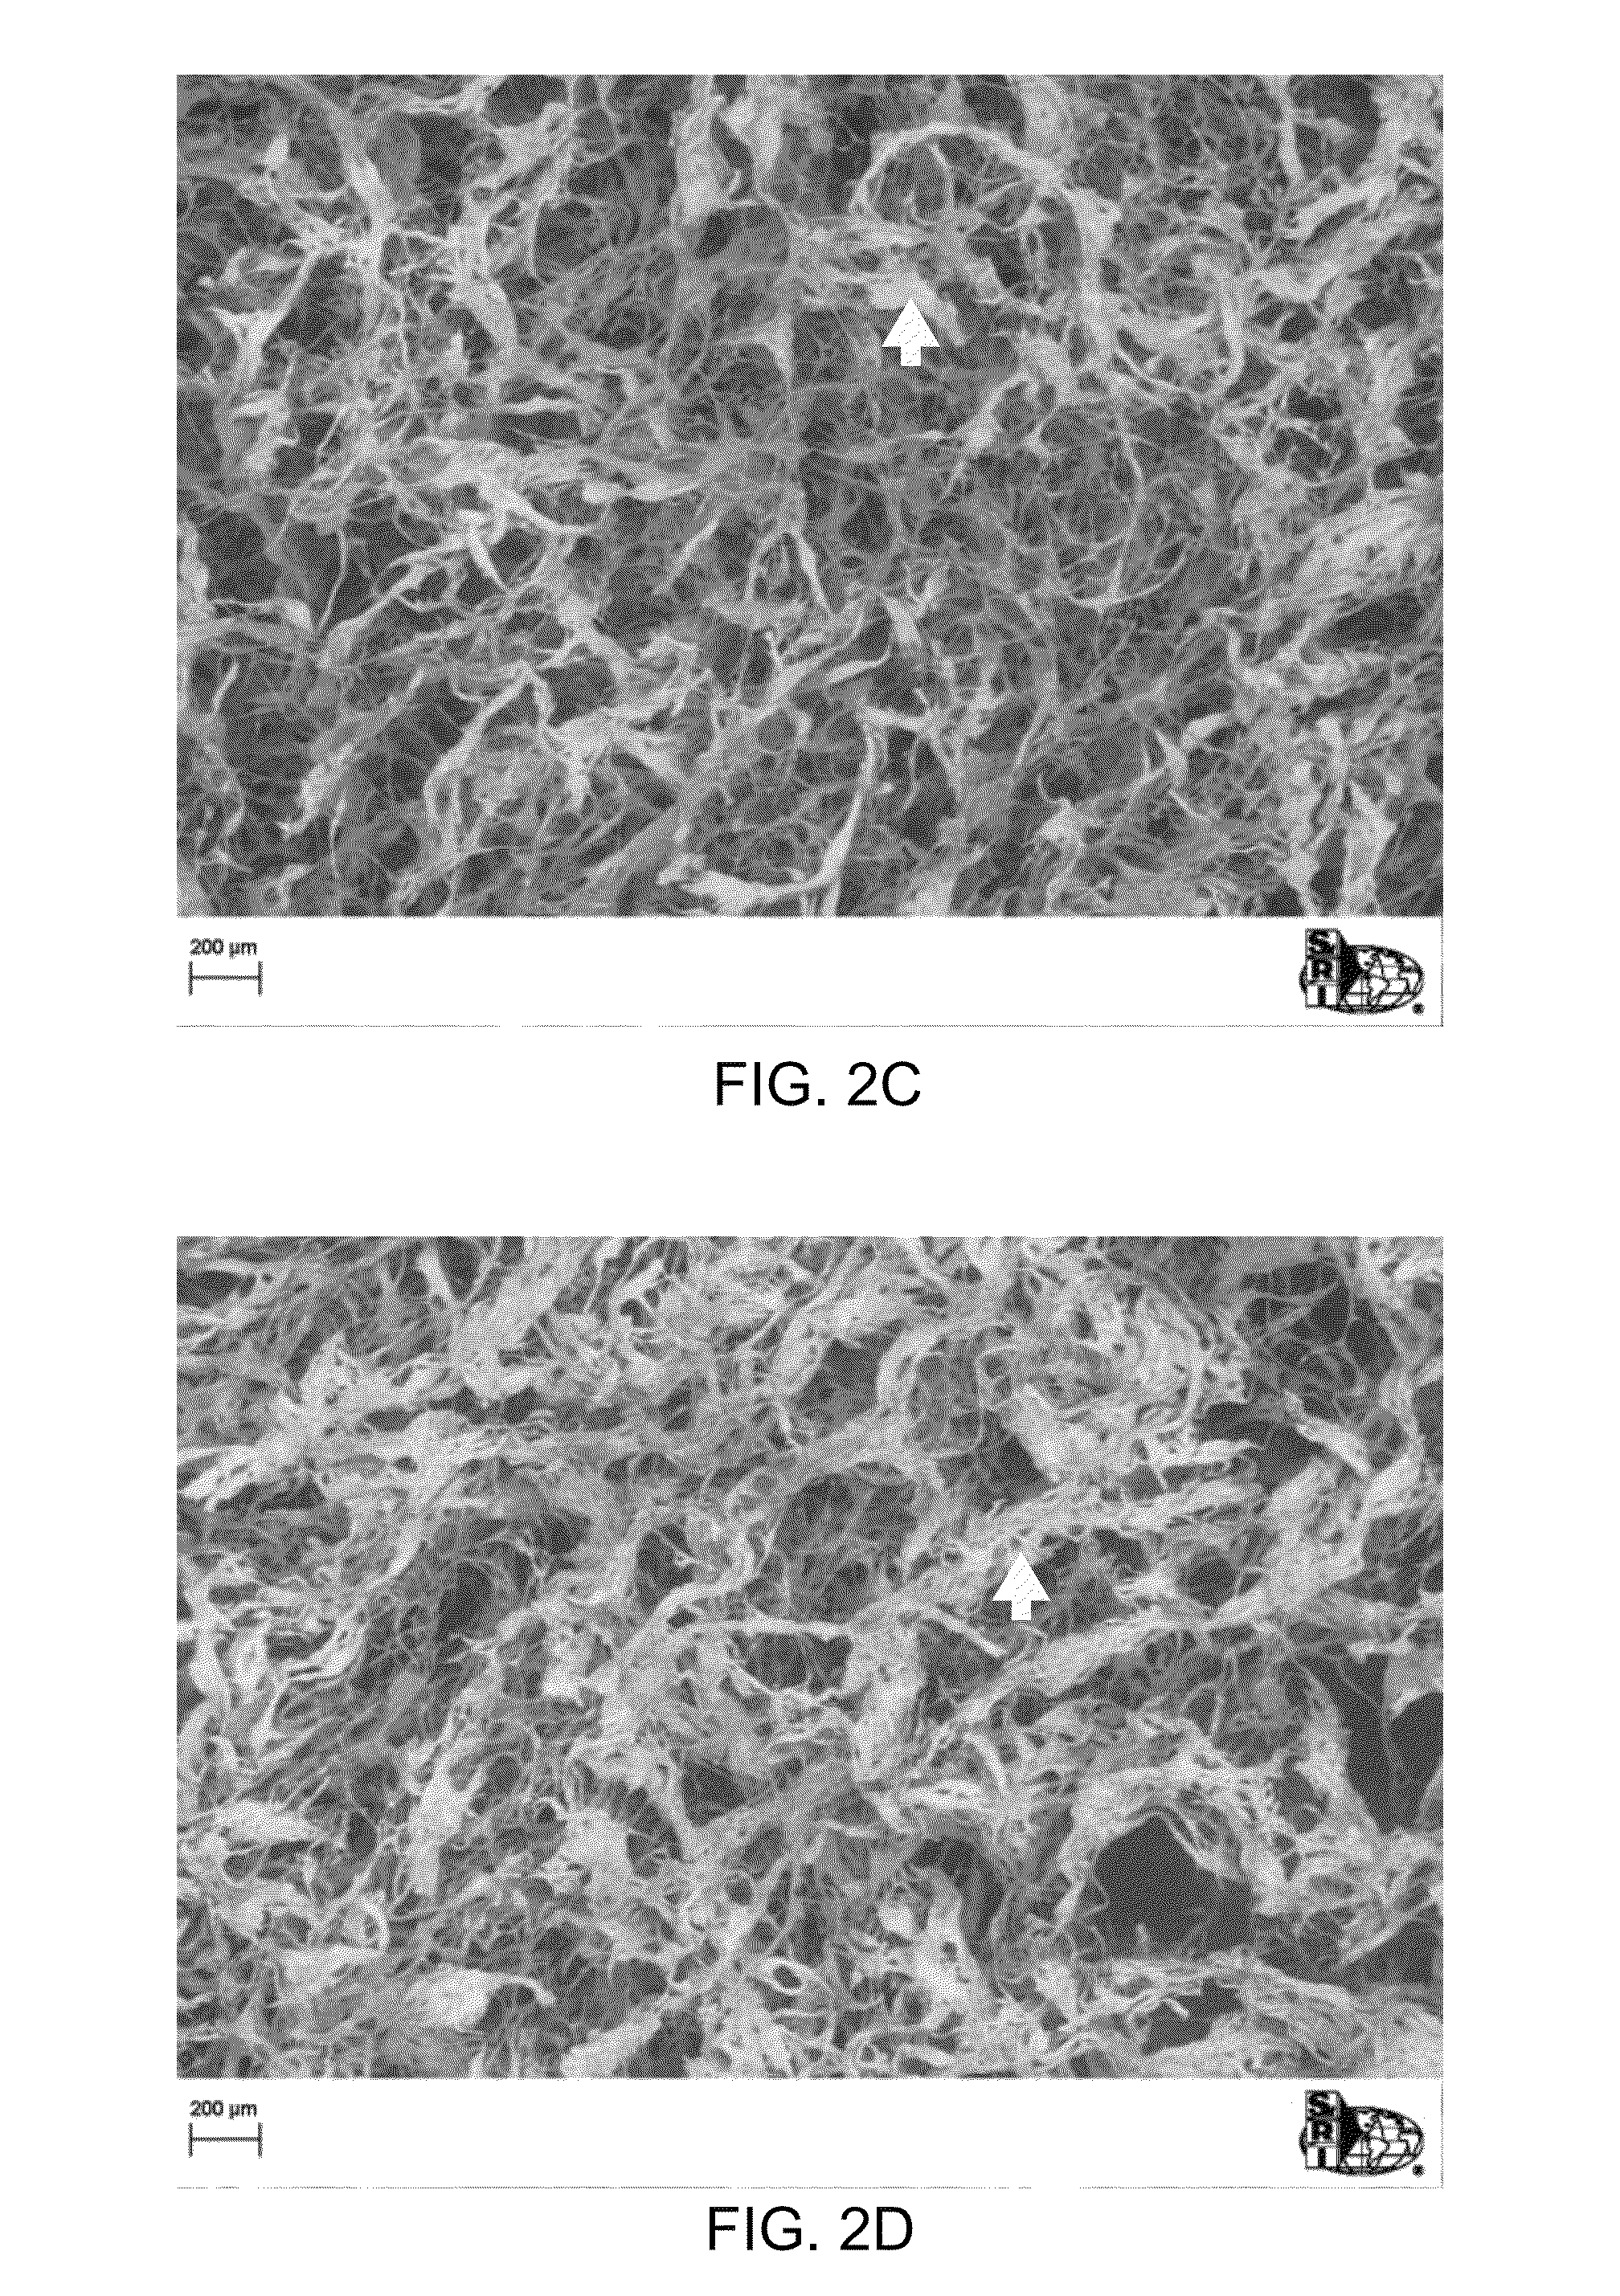 Fabrication of bone regeneration scaffolds and bone filler material using a perfusion flow system